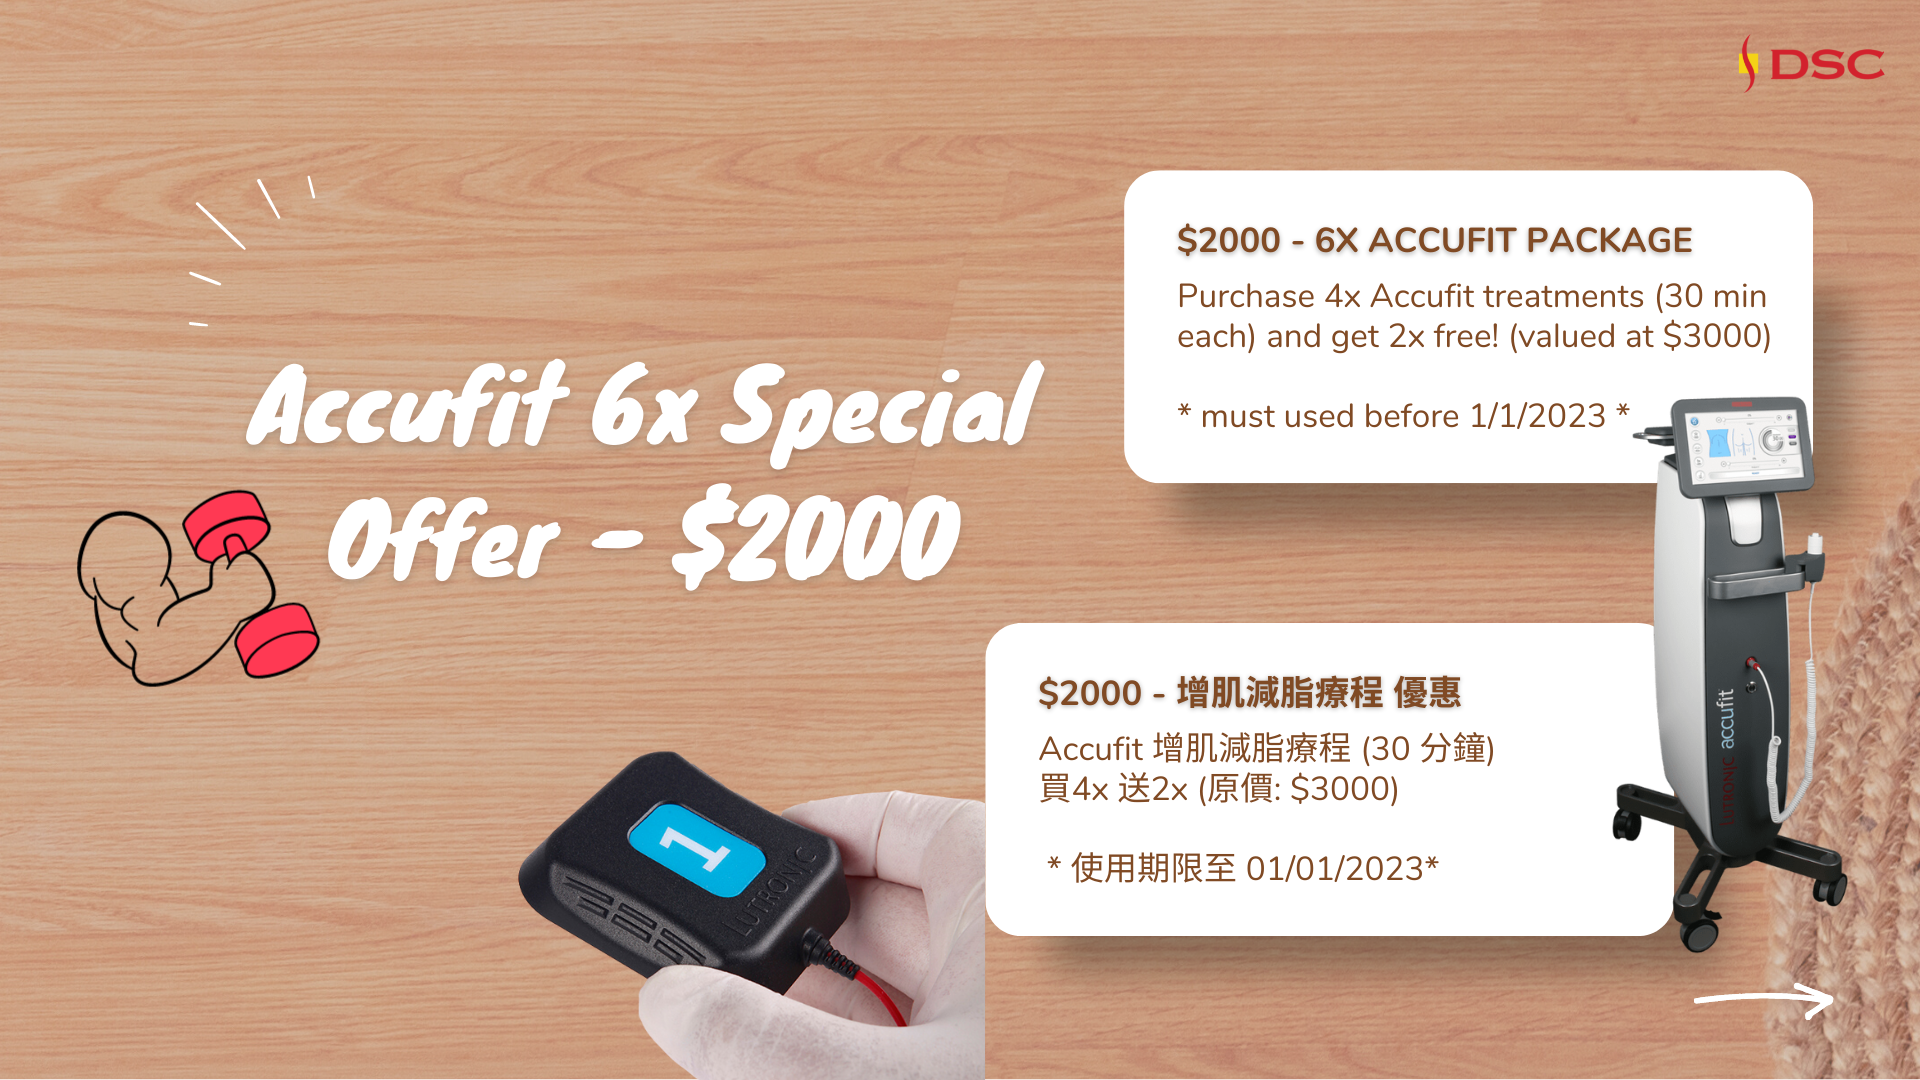 DSC 11/11 & Black Friday Lutronic Accufit Special, with 6x accufit for $2000 and 10x accufit for $3000, special promo prices with image of accufit device and accufit elecrode